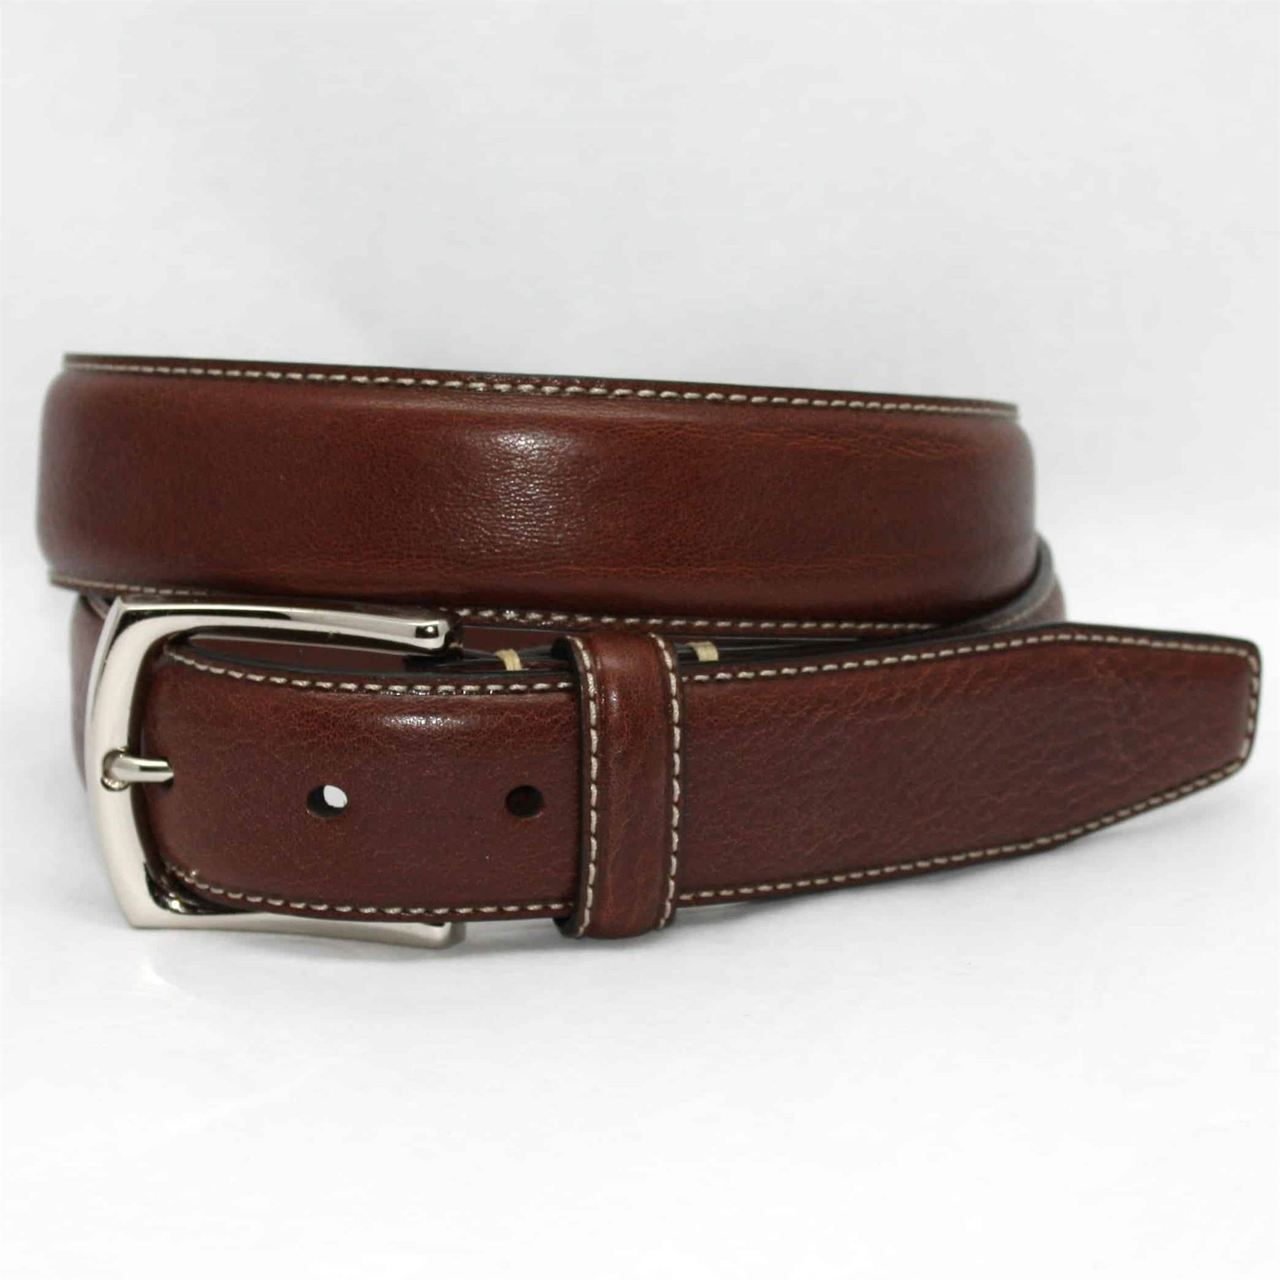 Burnished Tumbled Leather Belt in Brown by Torino Leather Co. - Hansen's  Clothing